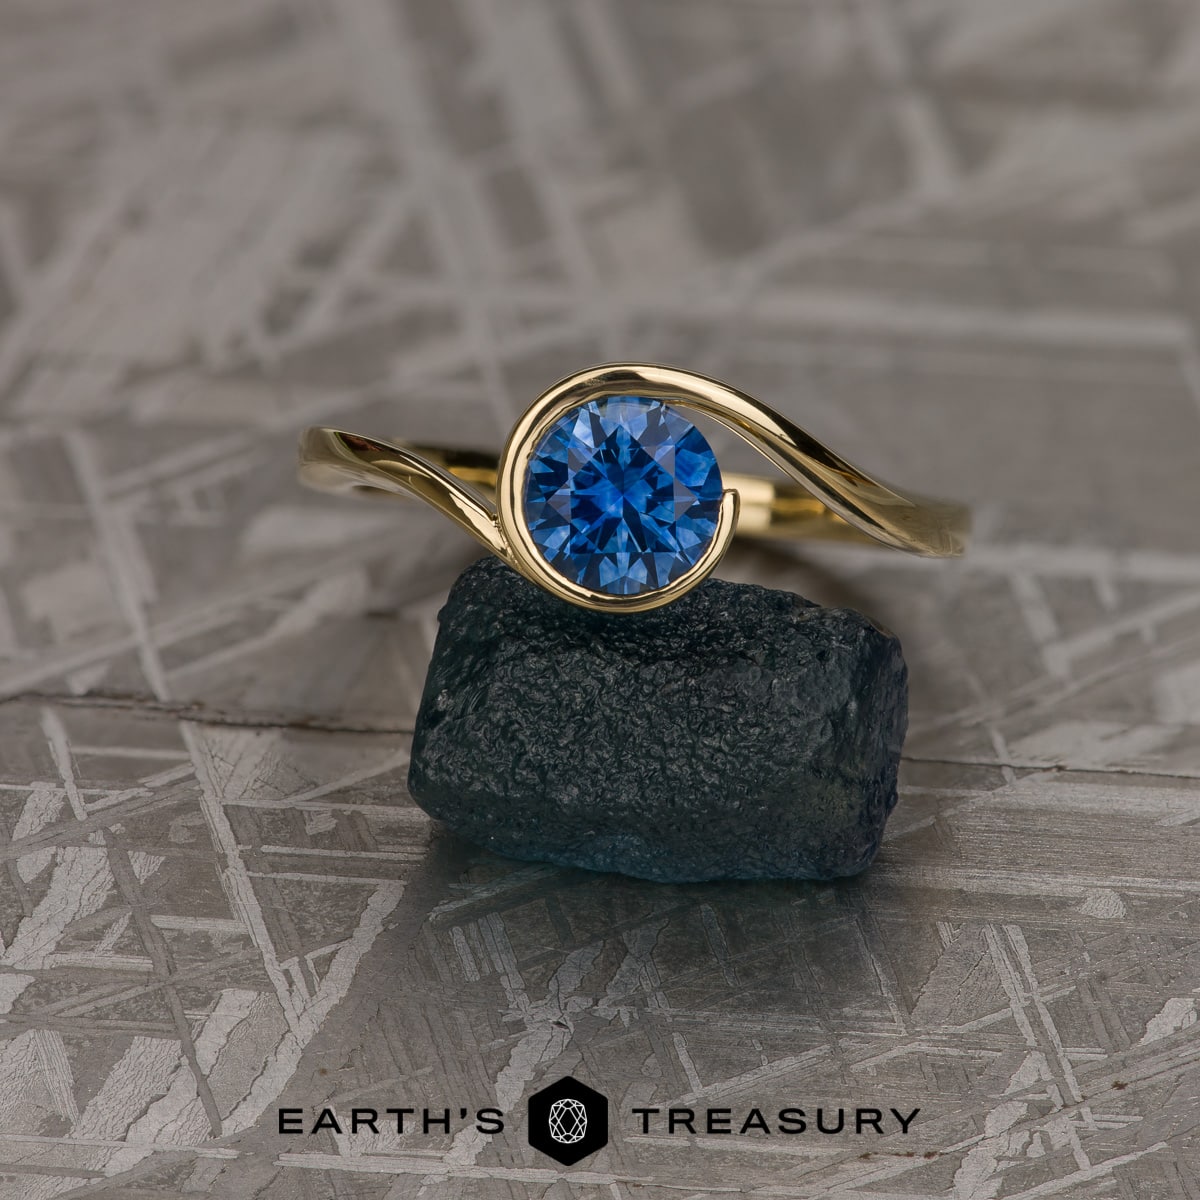 The "Calliste" in 18k yellow gold with 1.04-carat Montana sapphire